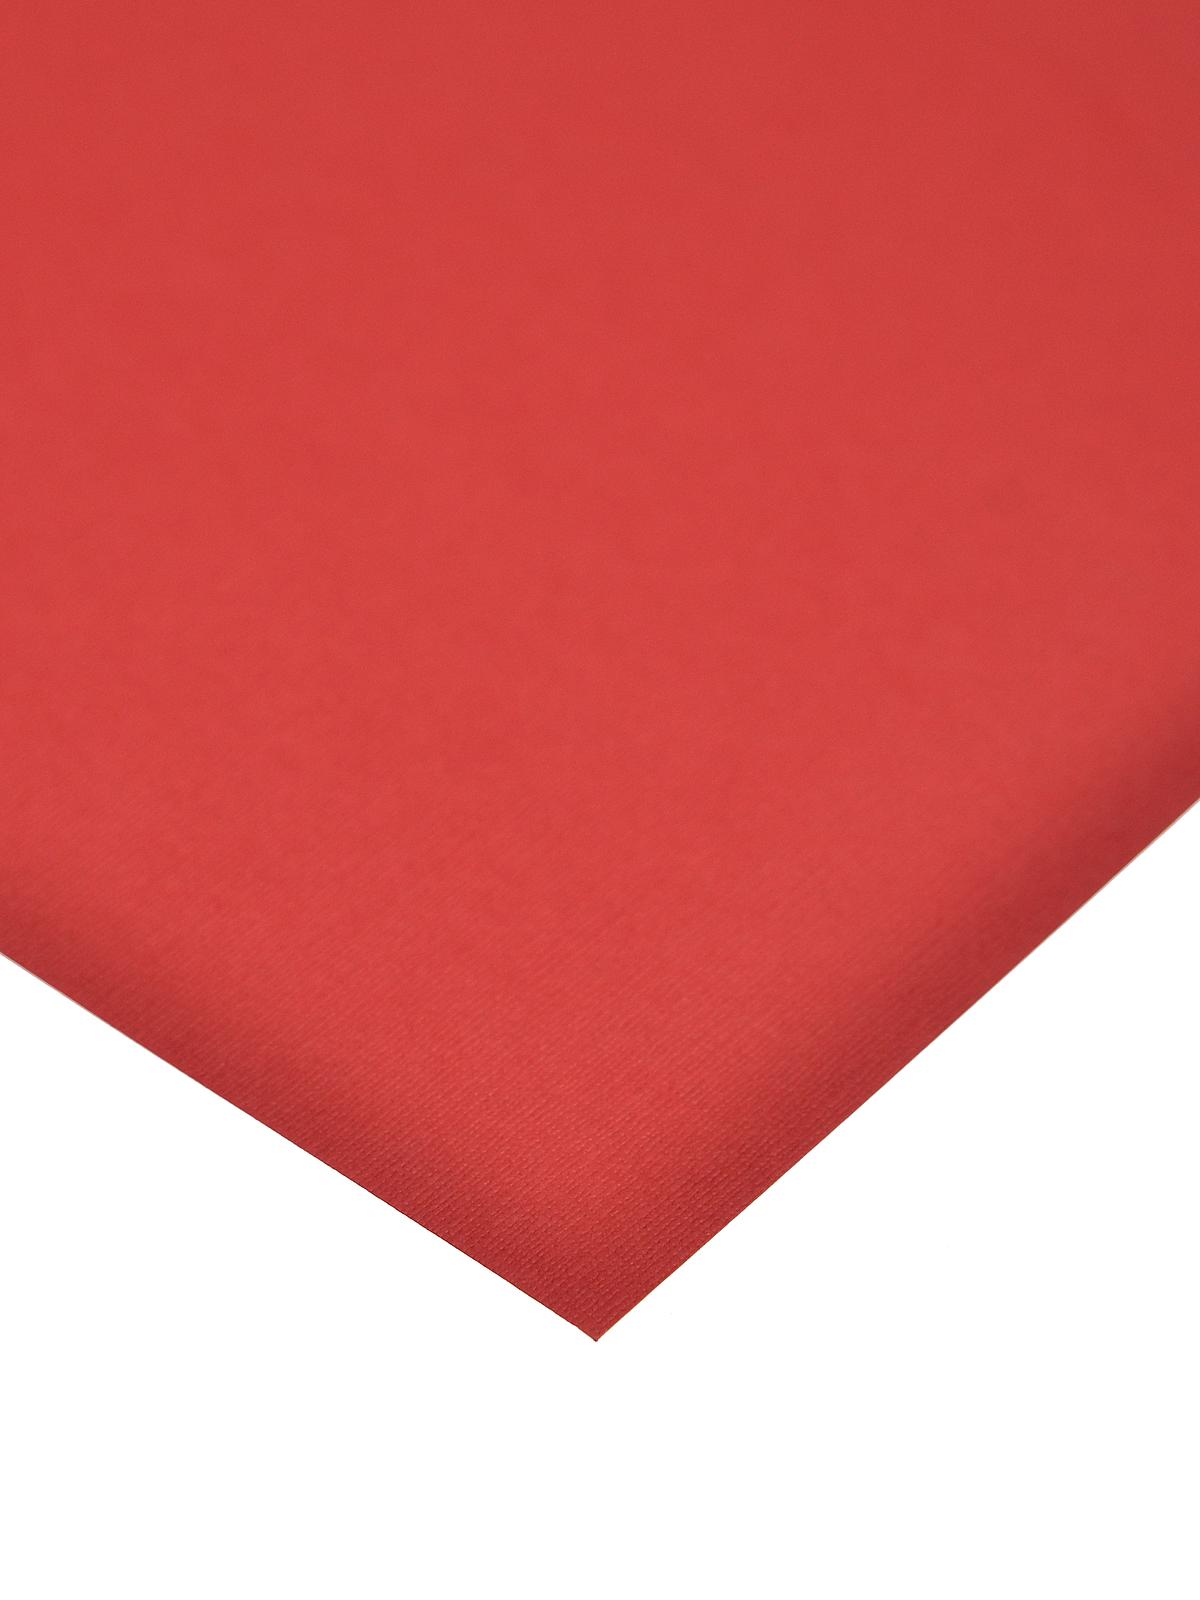 80 Lb. Canvas 8.5 In. X 11 In. Sheet Red Cherry